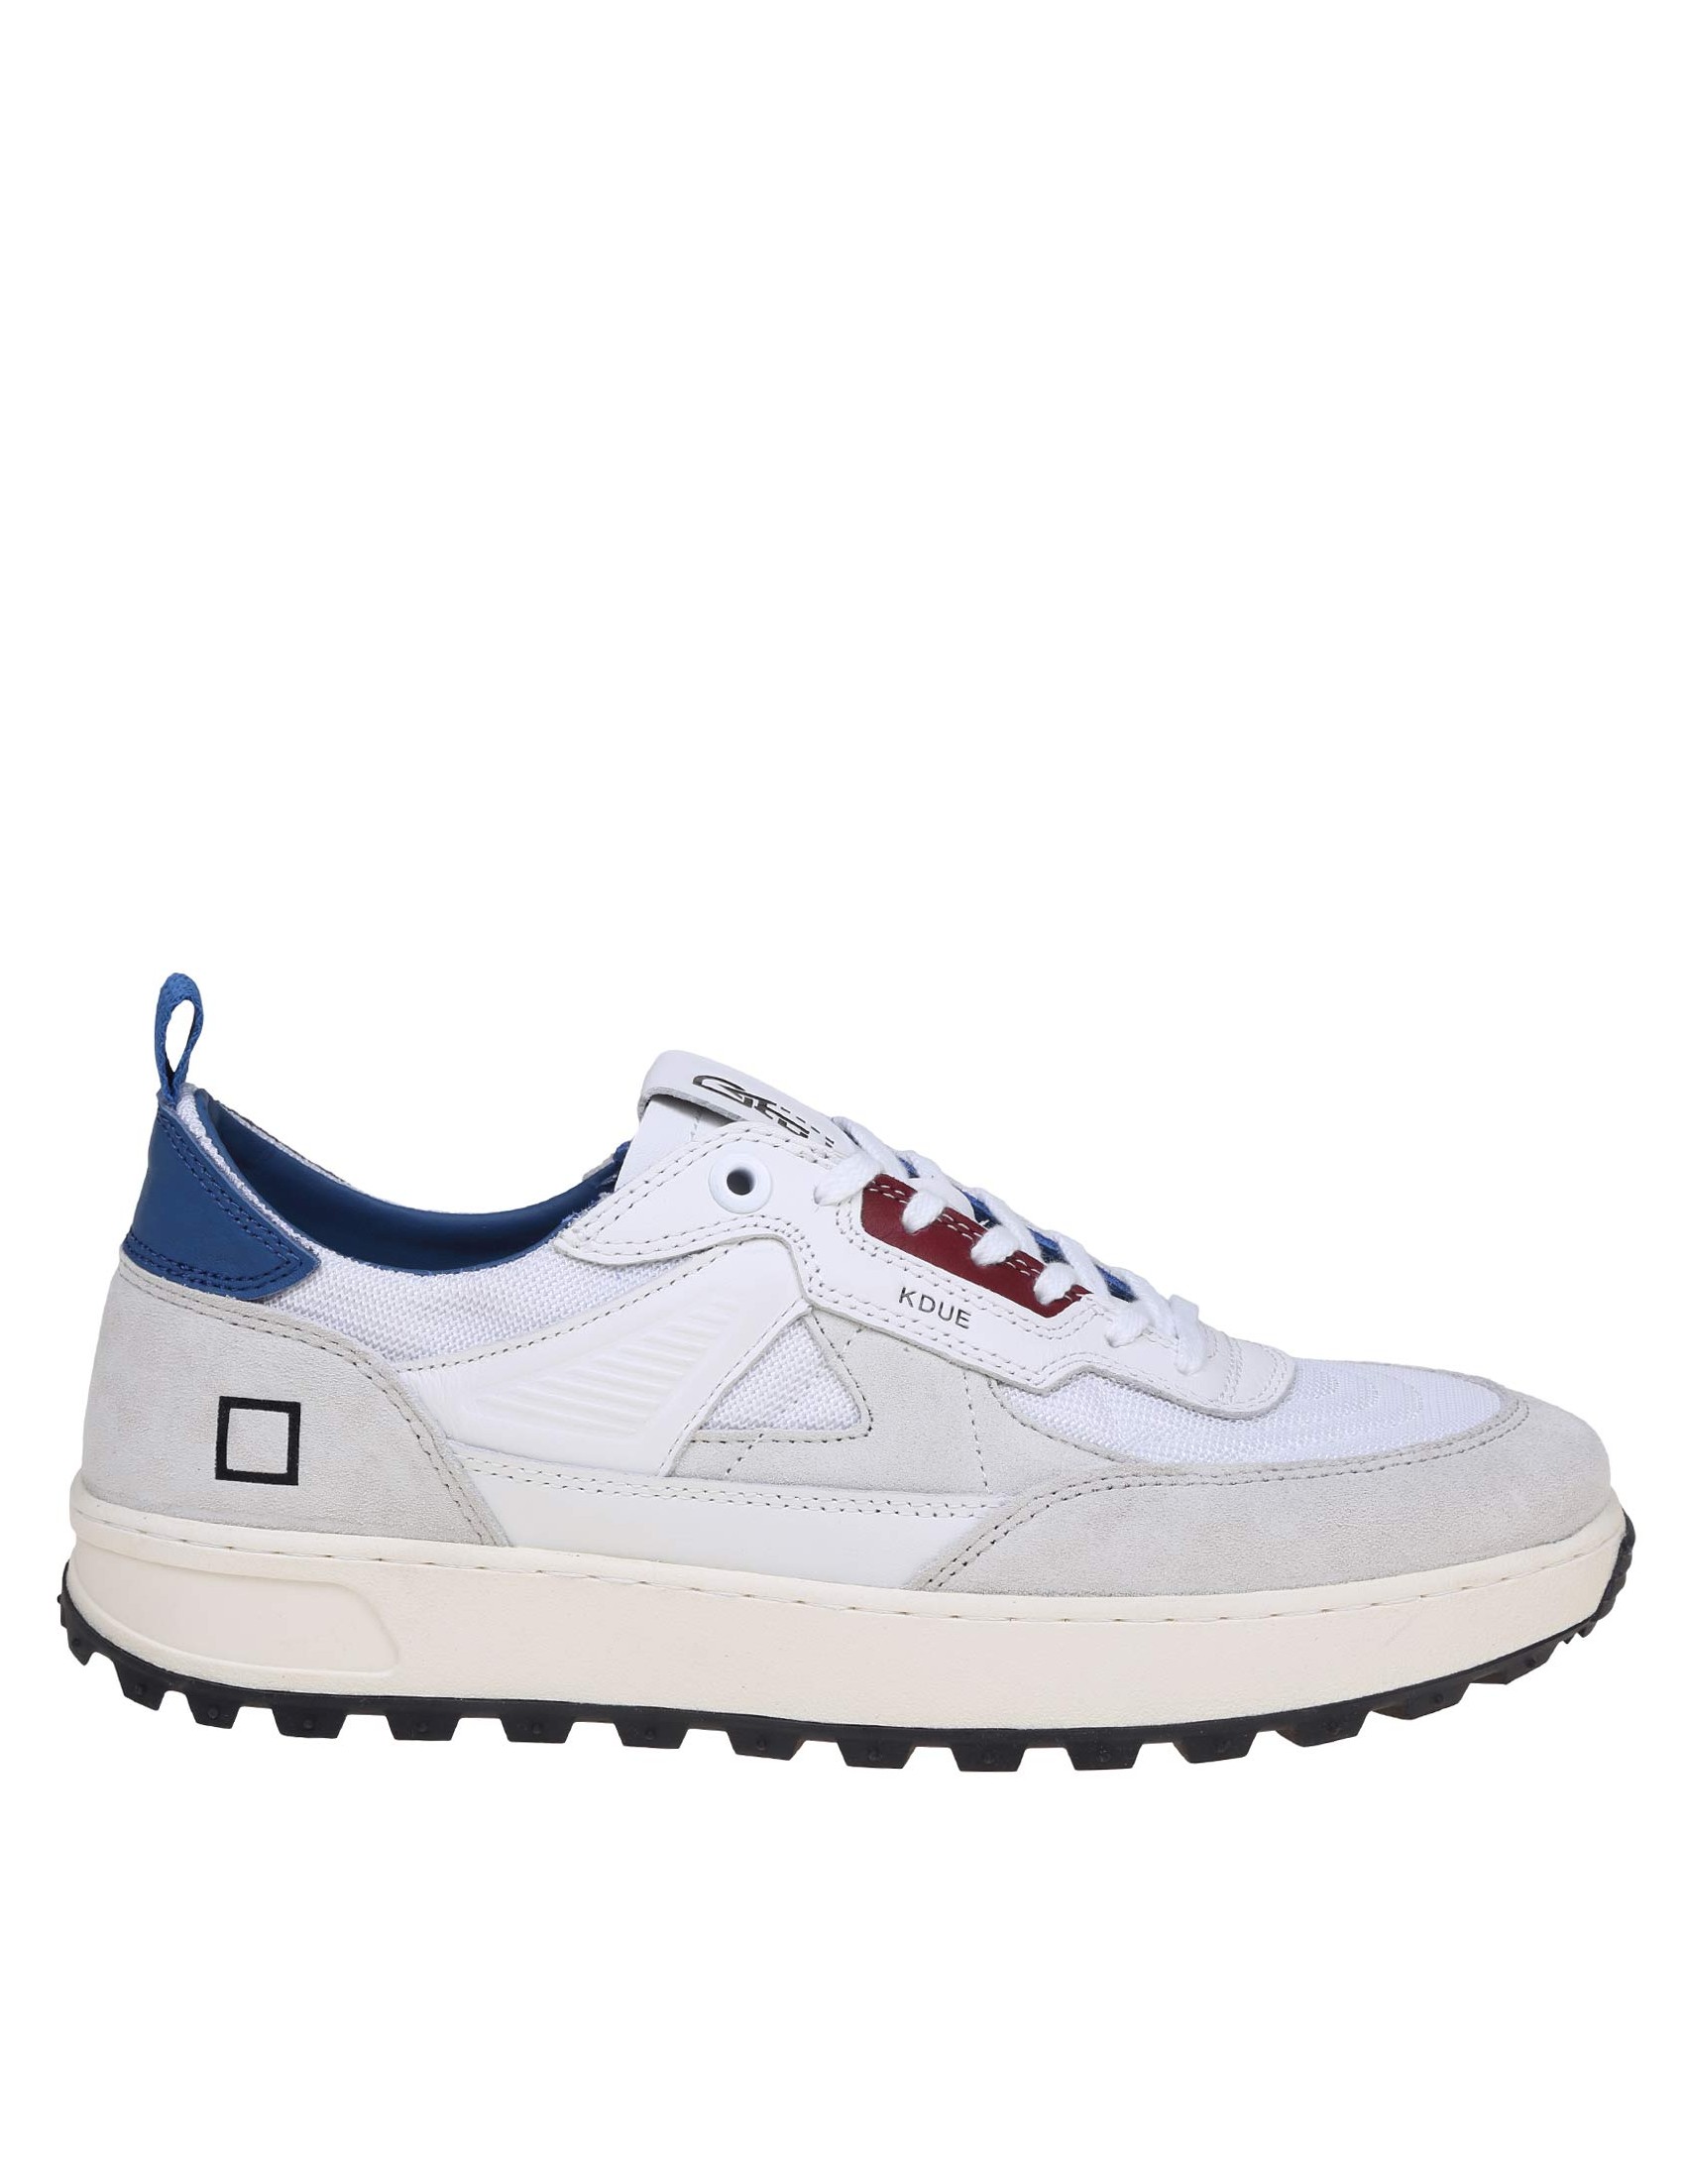 D.A.T.E. KDUE SNEAKERS IN WHITE/BLUE SUEDE AND LEATHER